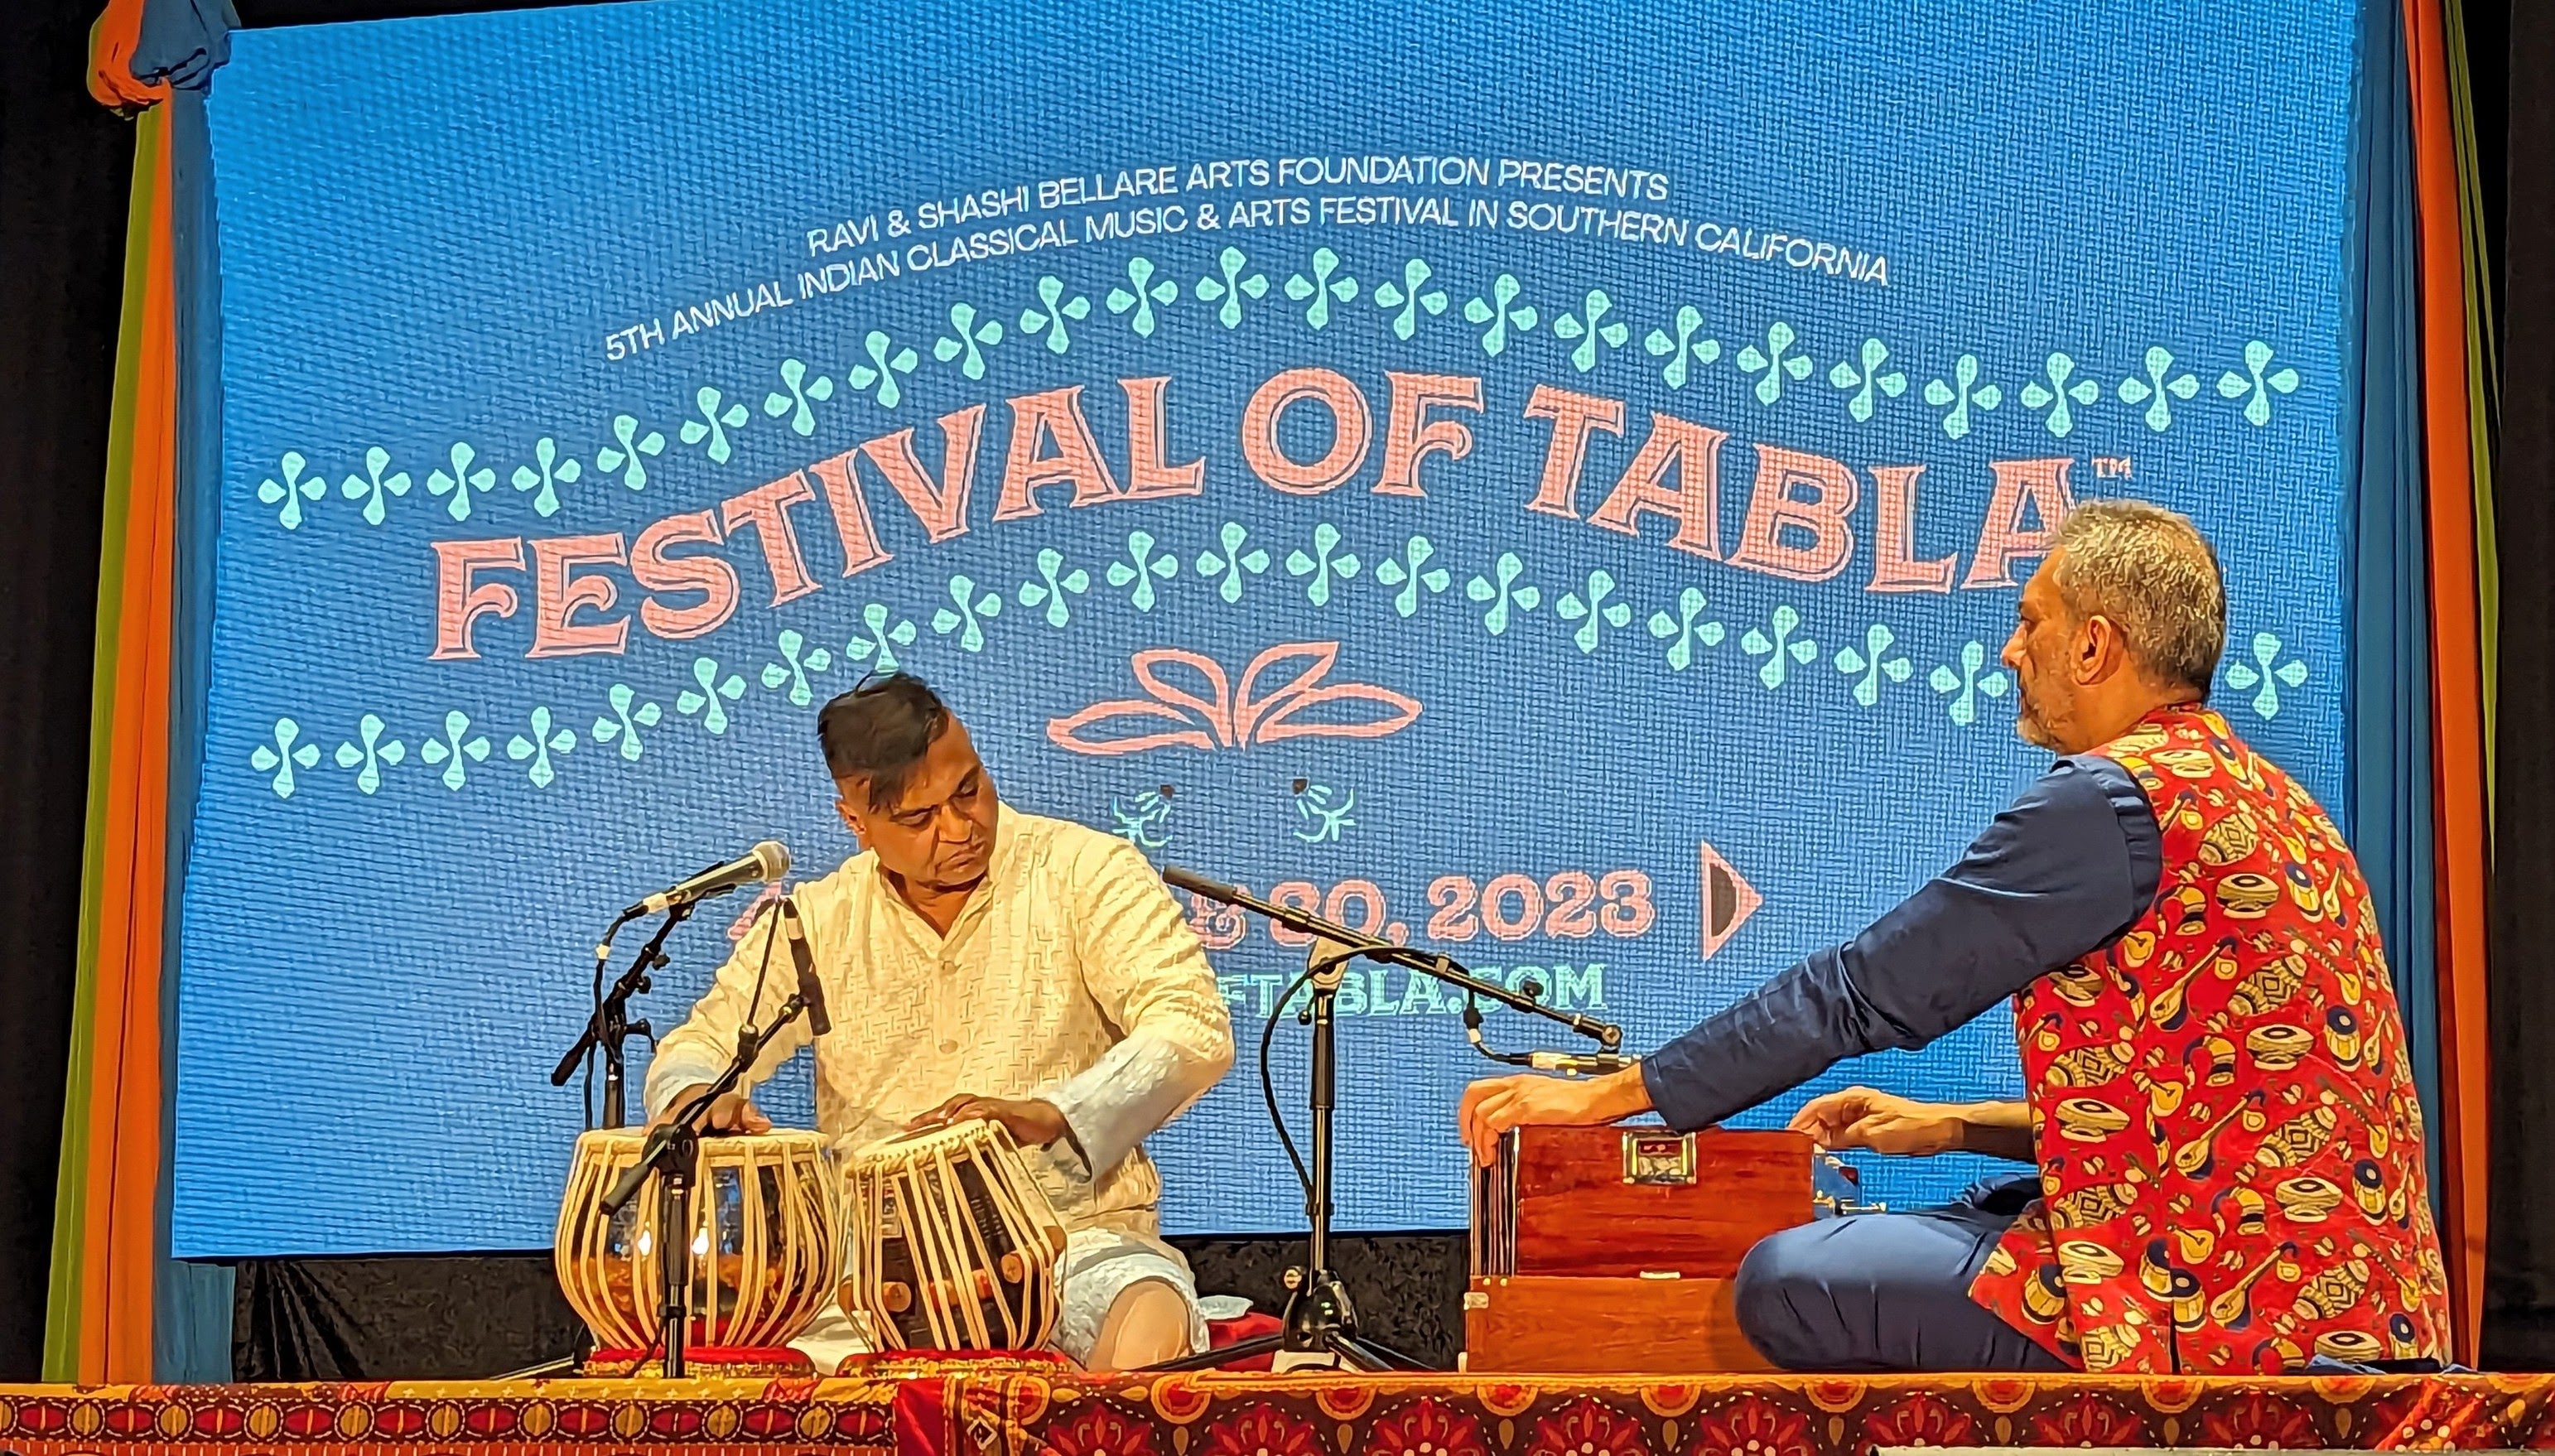 Big artists perform at the Festival of Tabla in Los Angeles